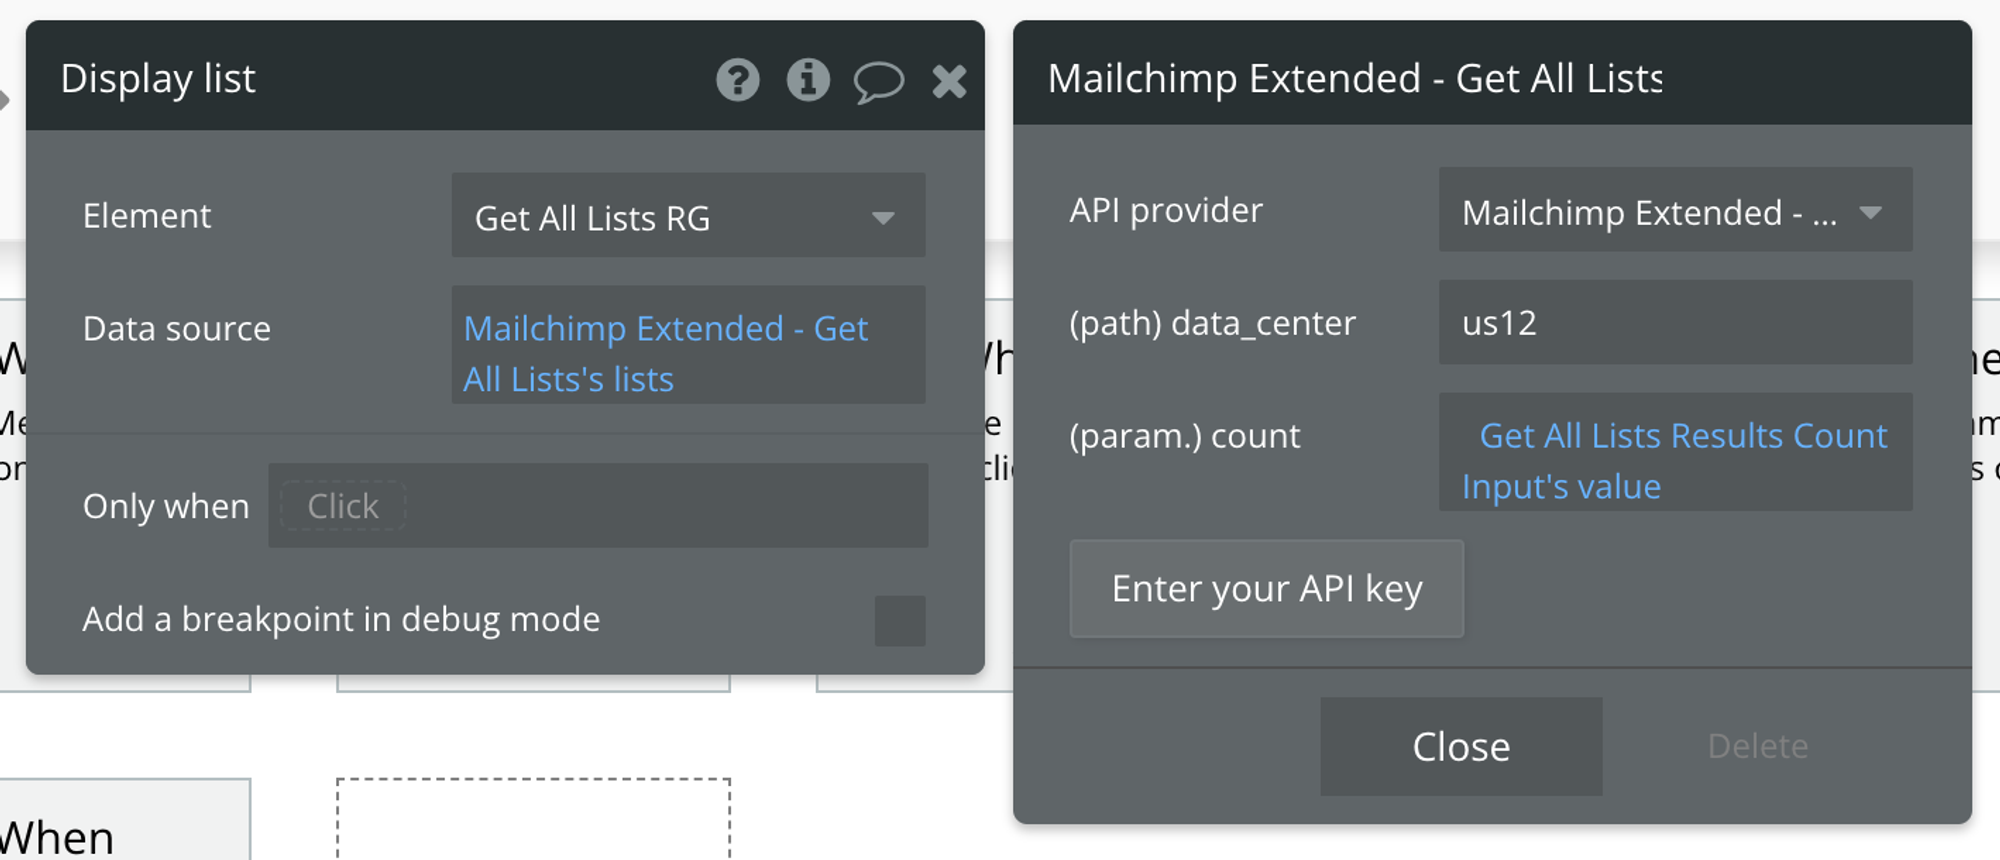 Select Mailchimp Extended - Get All List's lists for the data source